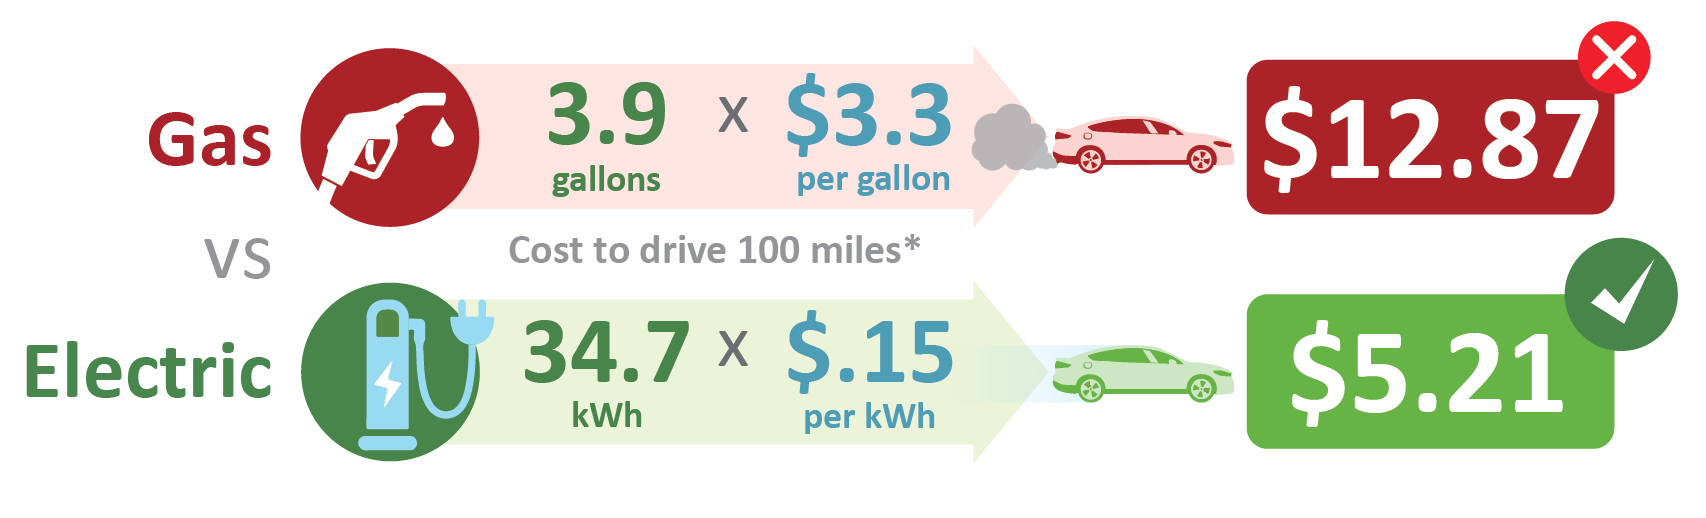 Gas vs Electric Cost to Drive